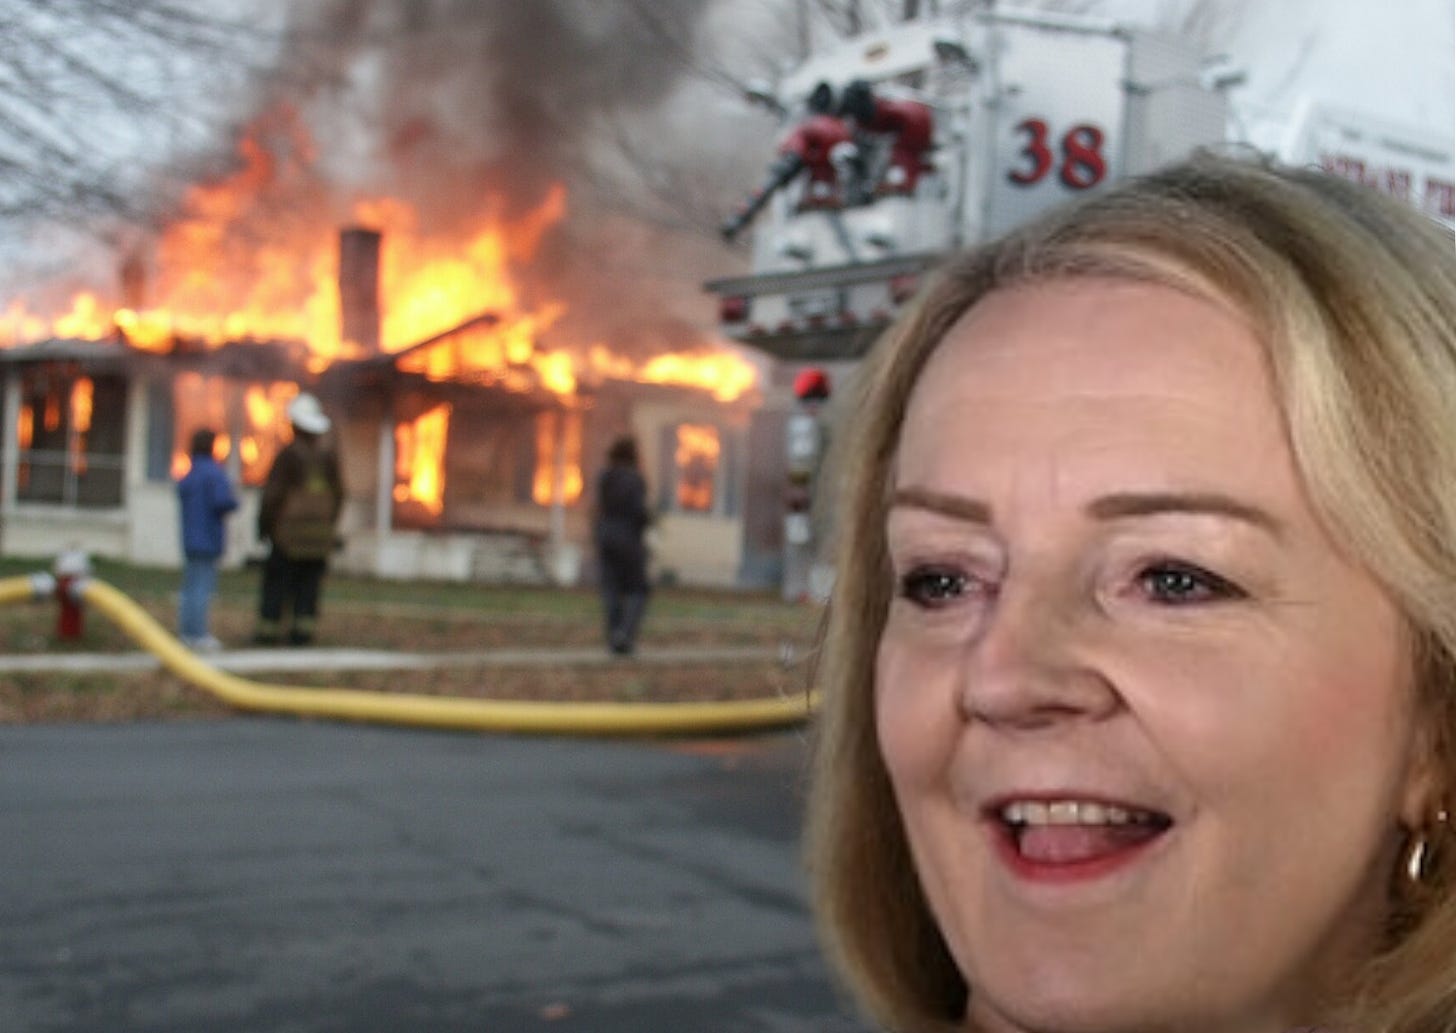 Liz Truss smiling in front of a burning house